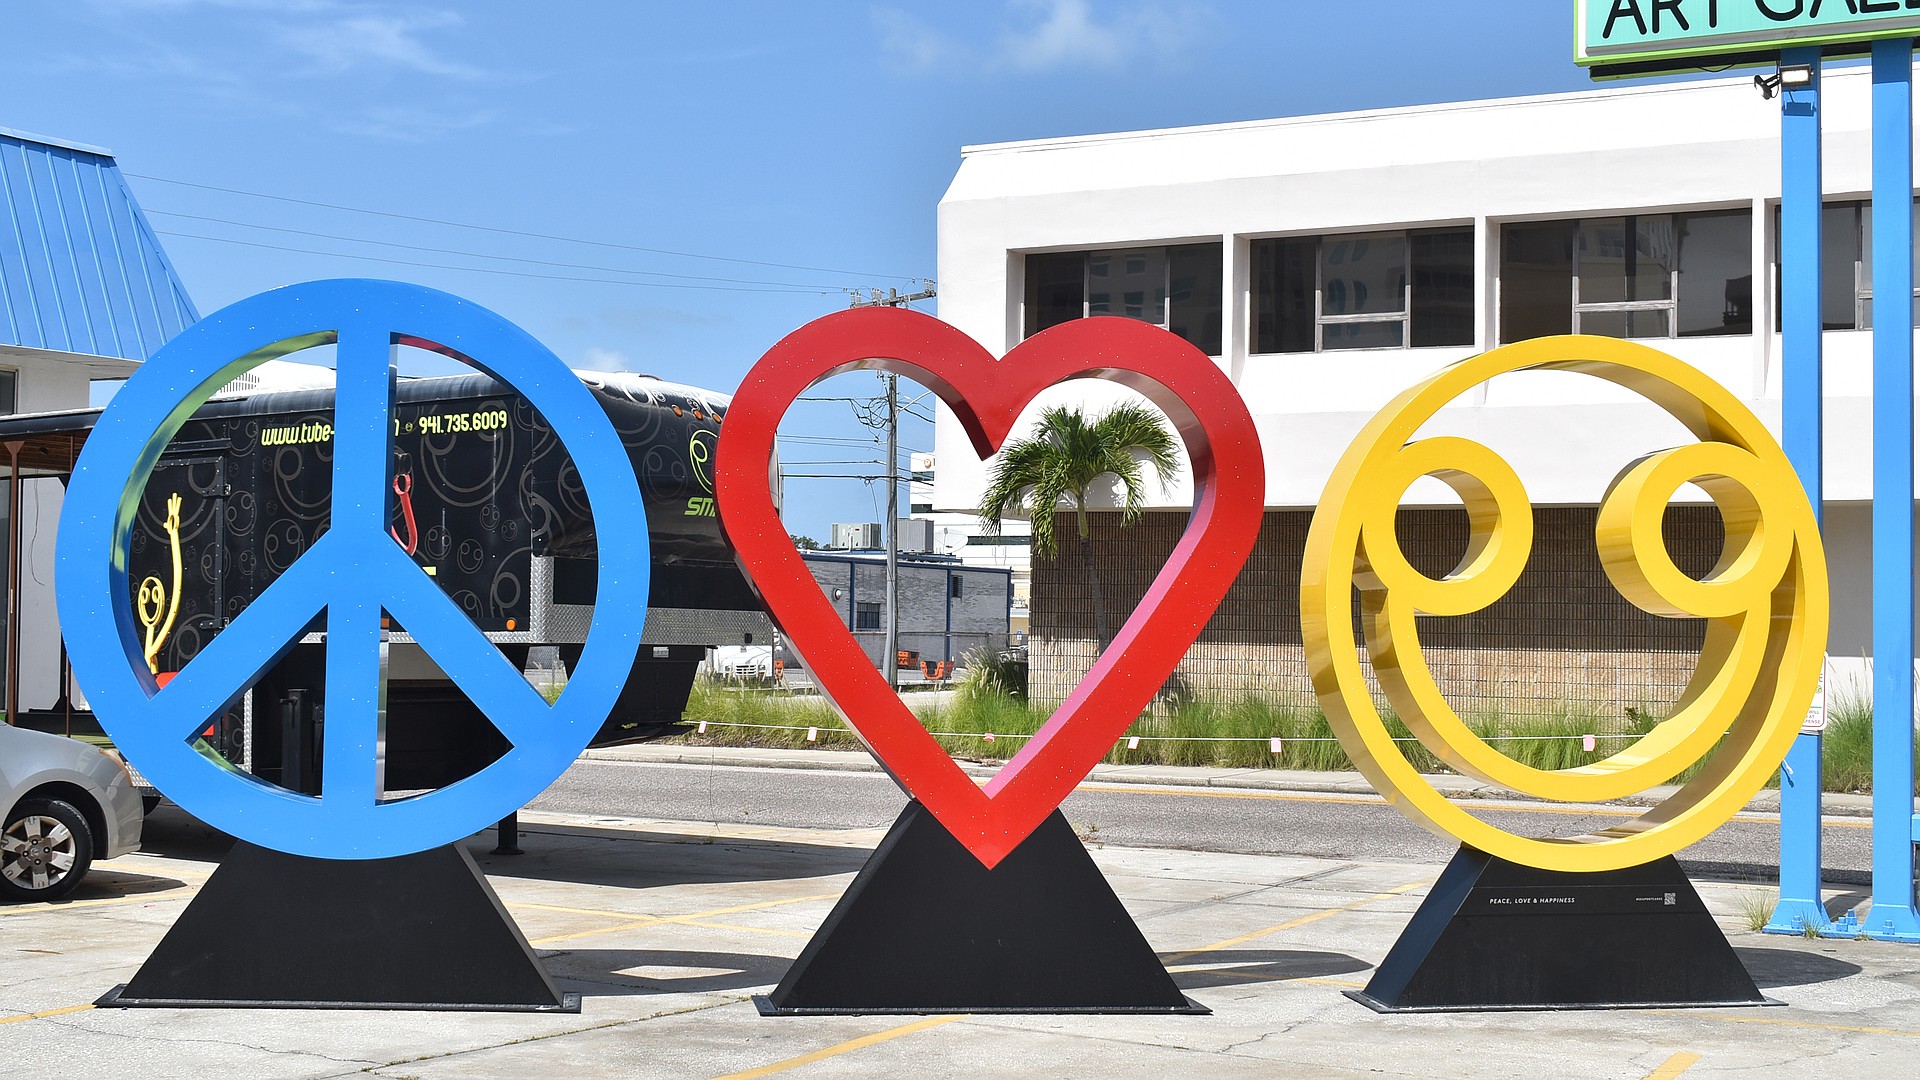 In July 2020, a three-piece Peace, Love and Happiness installation displayed in Tube Dude's parking lot on Main Street ahead of its debut in New York City.